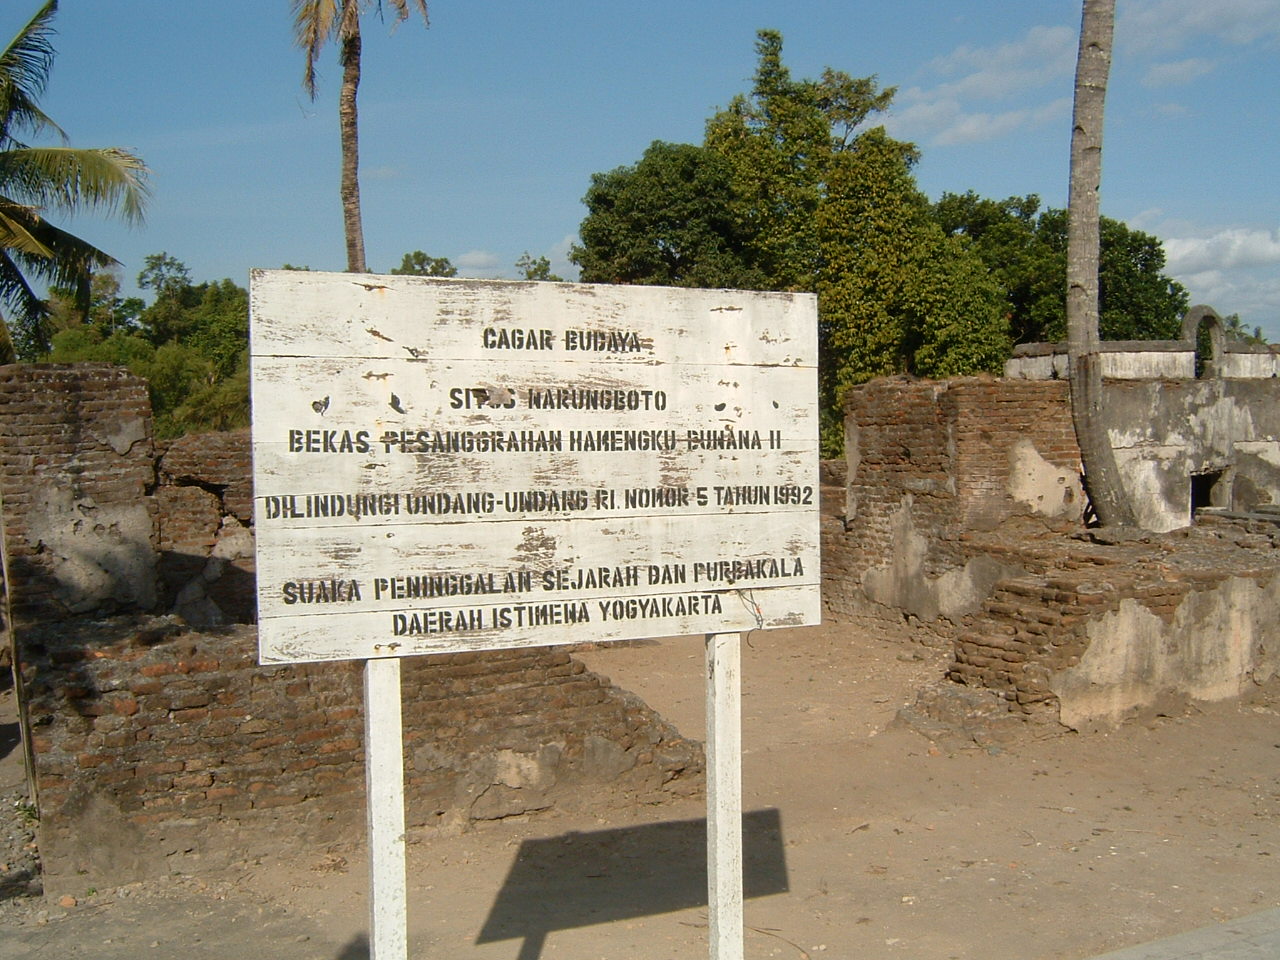 View of sign noting that this historic site has been preserved under national law number five since 1992